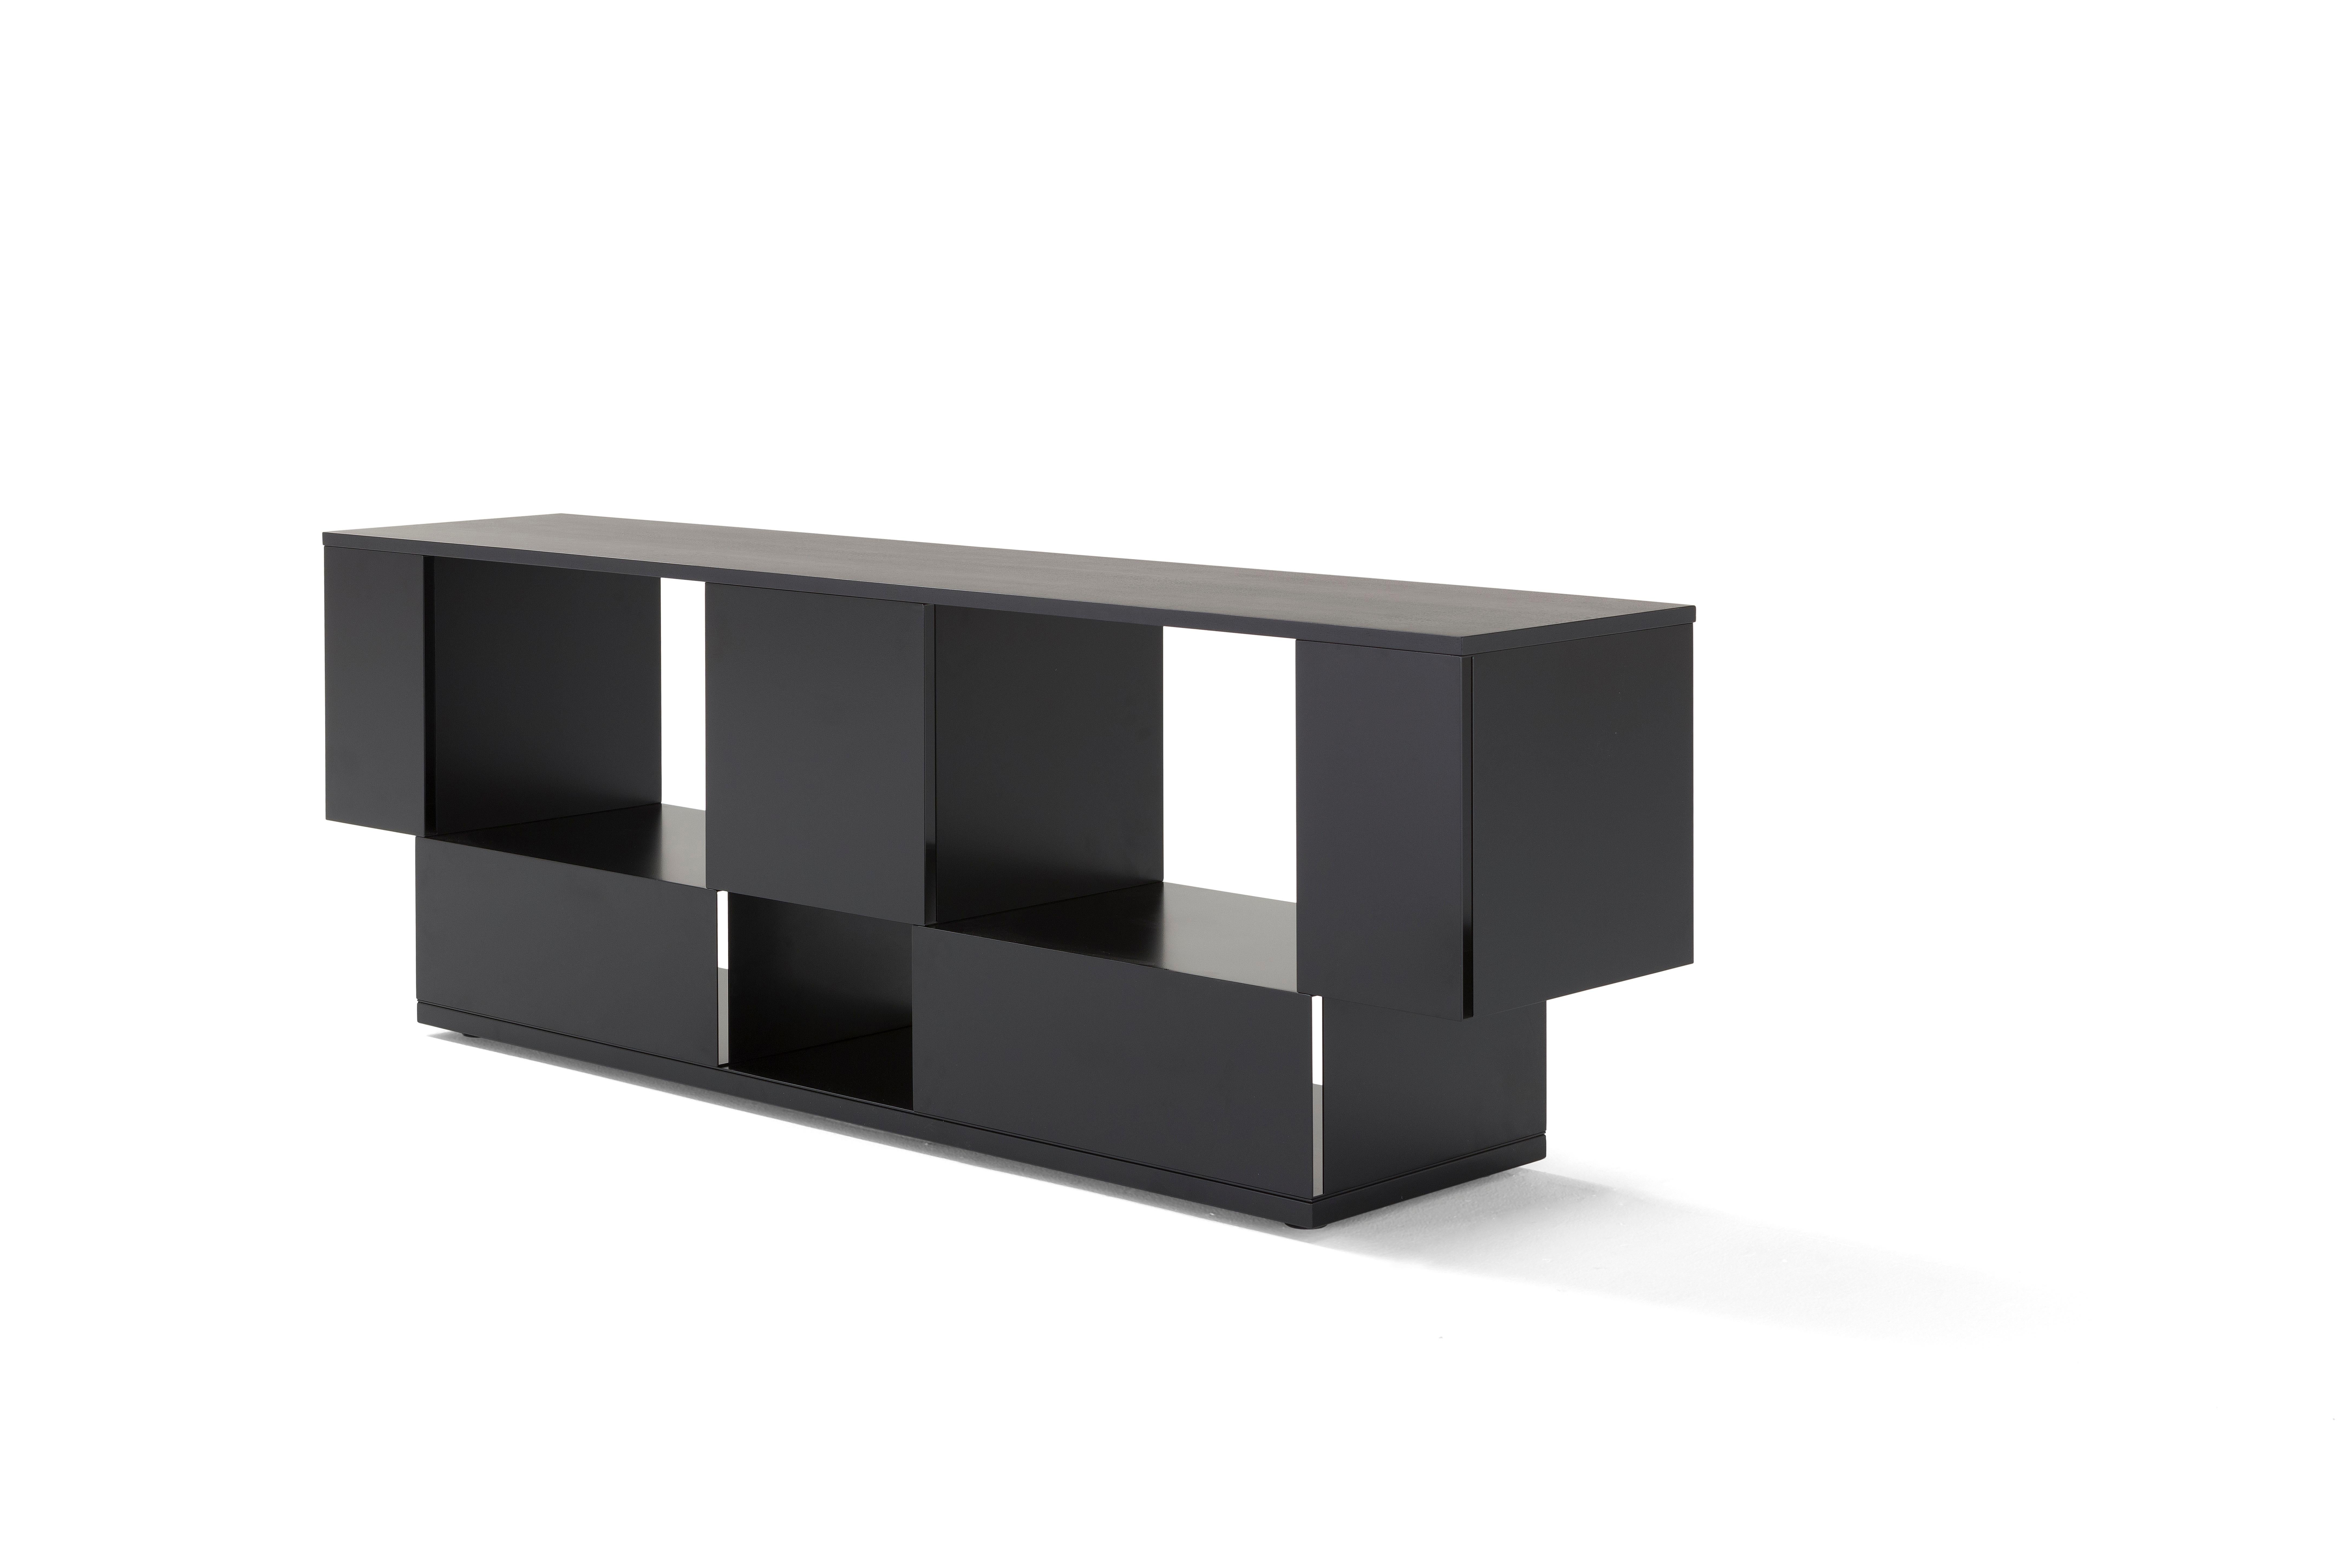 Geometry and strictness characterize this particular bookcase that combines design and functionality. In Eresia, volumes alternate in a balanced play of proportions. Cubes and parallelepipeds are spaced out with openings in a playful succession of